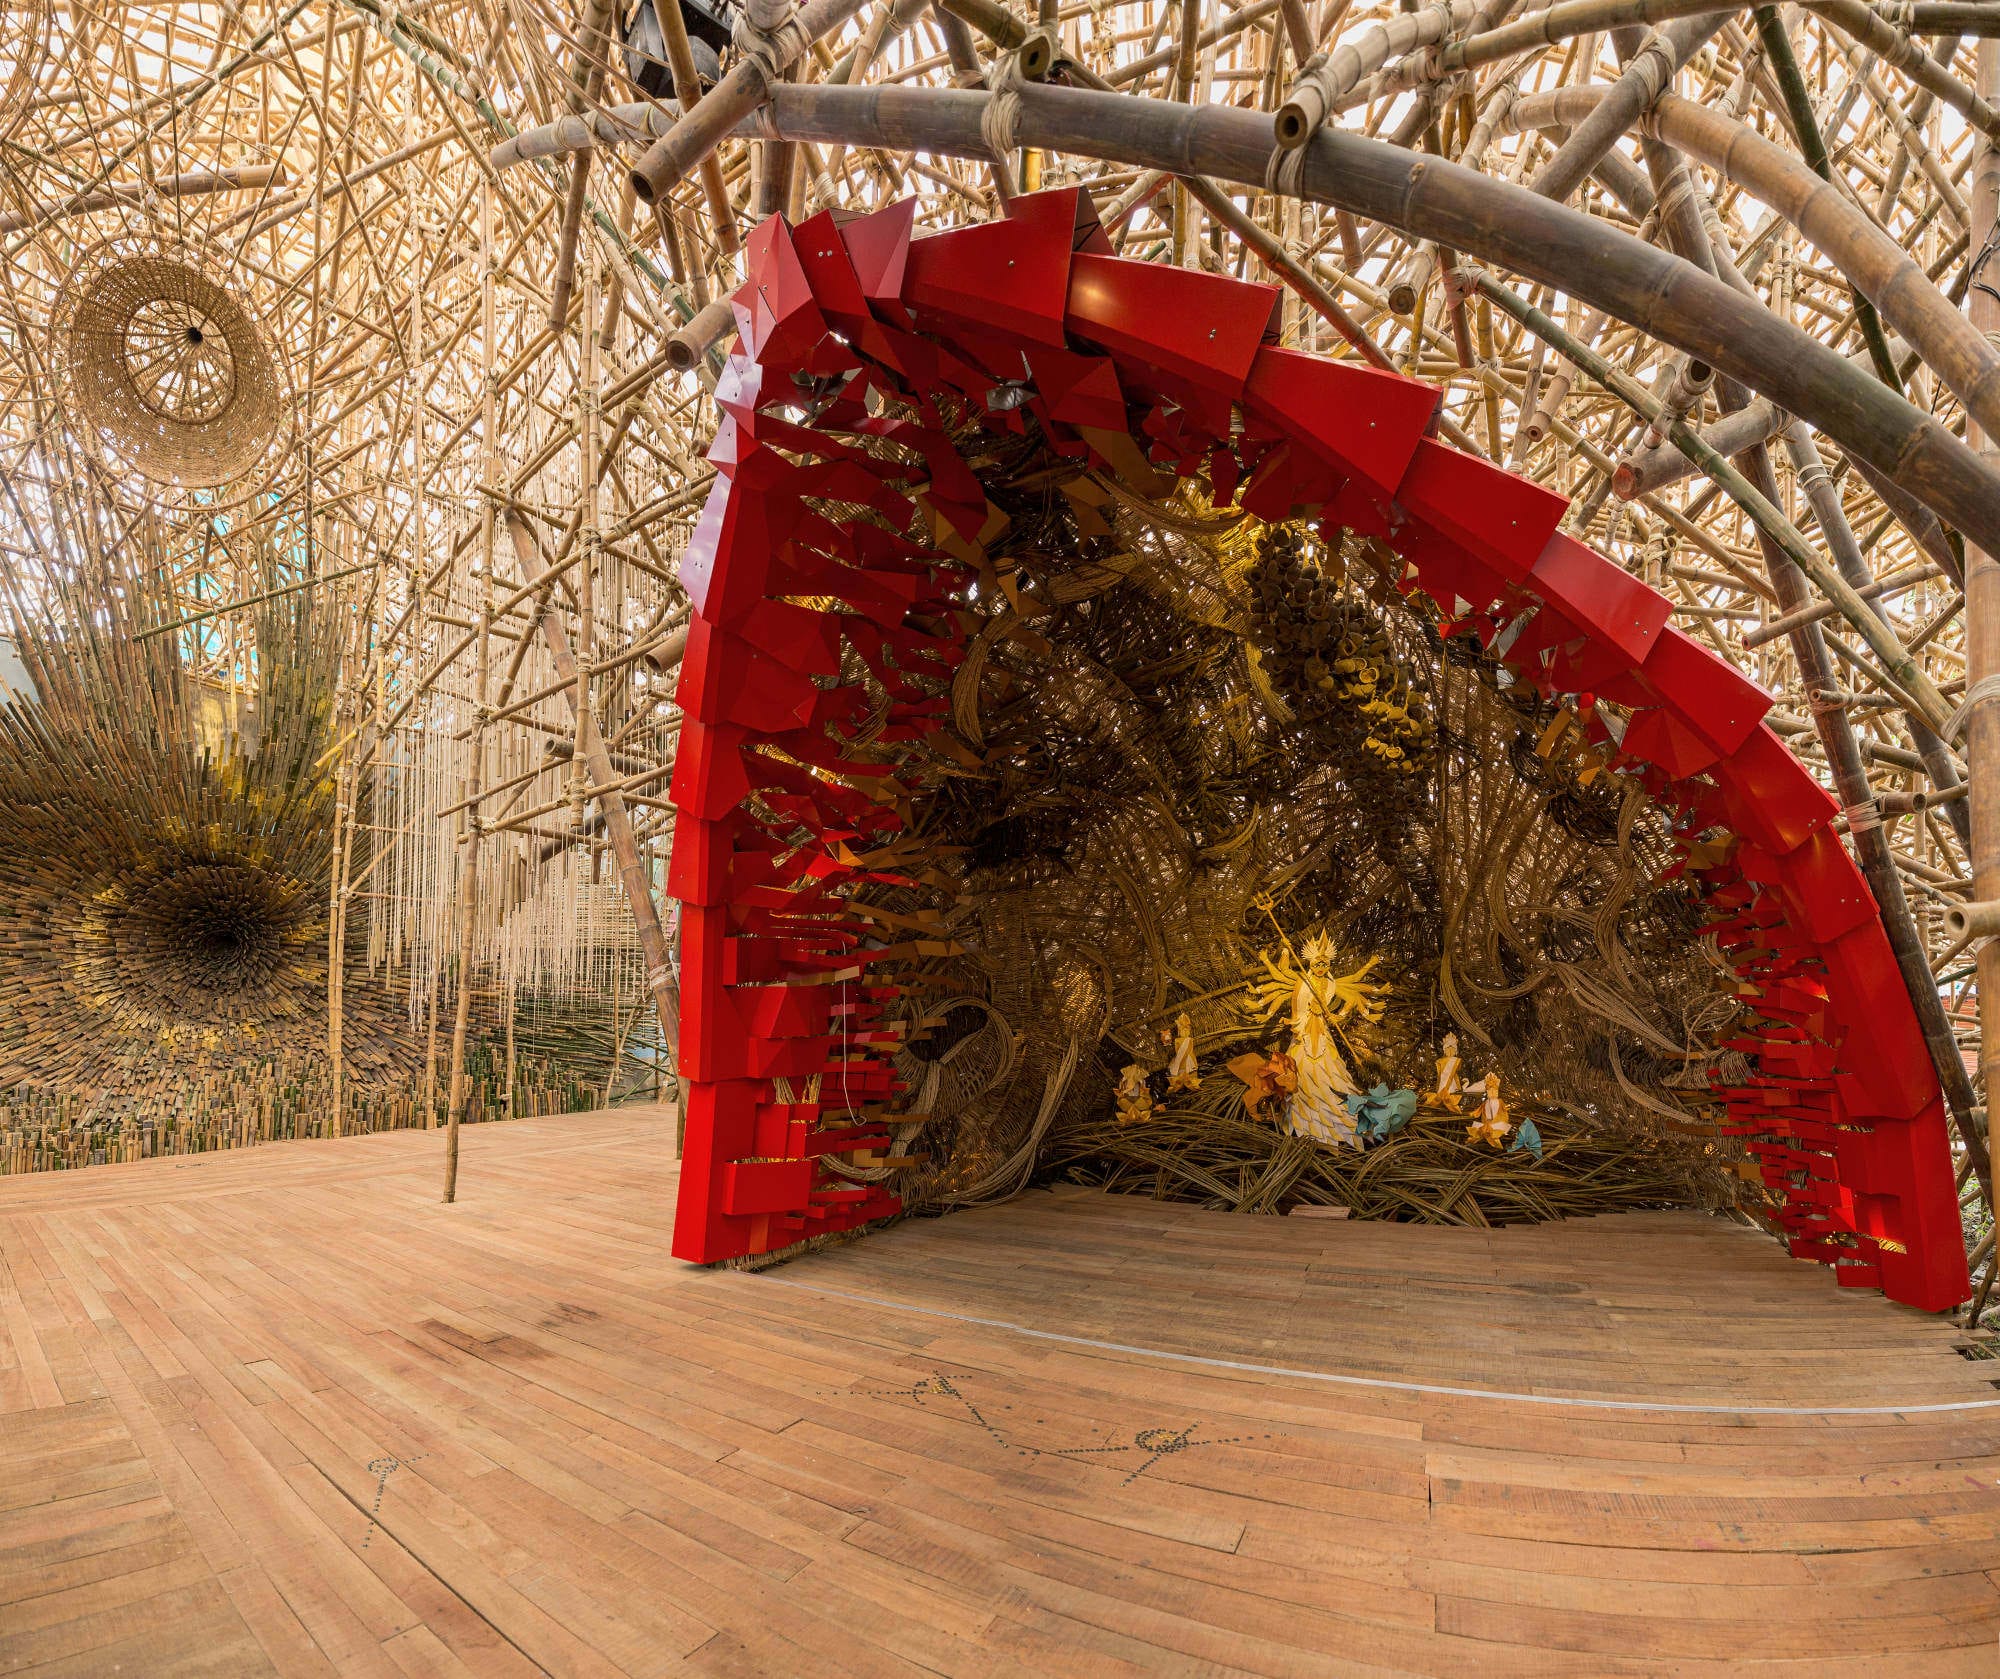 a large bamboo installation with a red shell structure